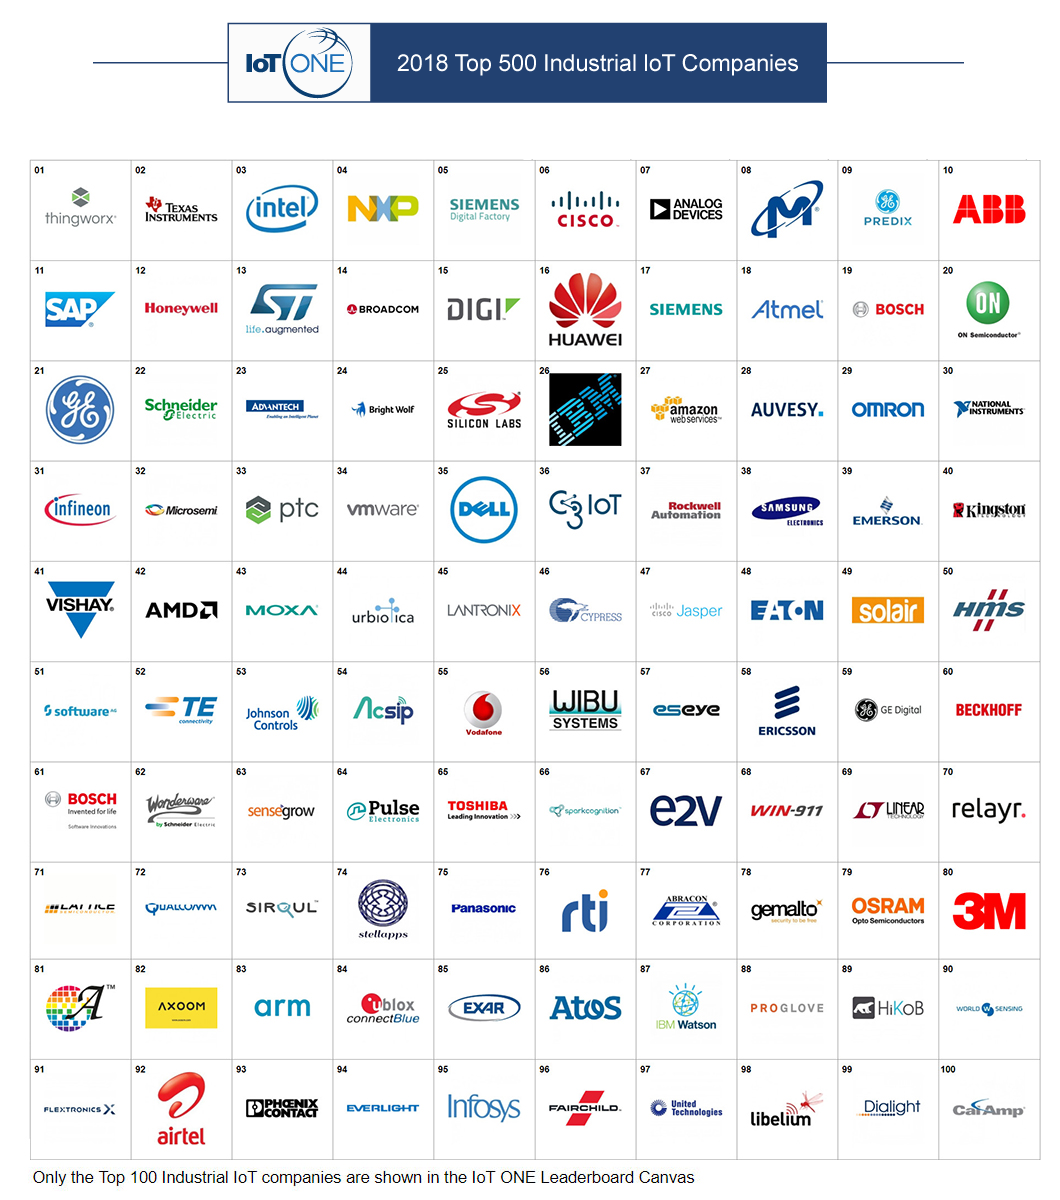 IoT ONE_2018 Top 500 Industrial IoT Companies_Canvas.png